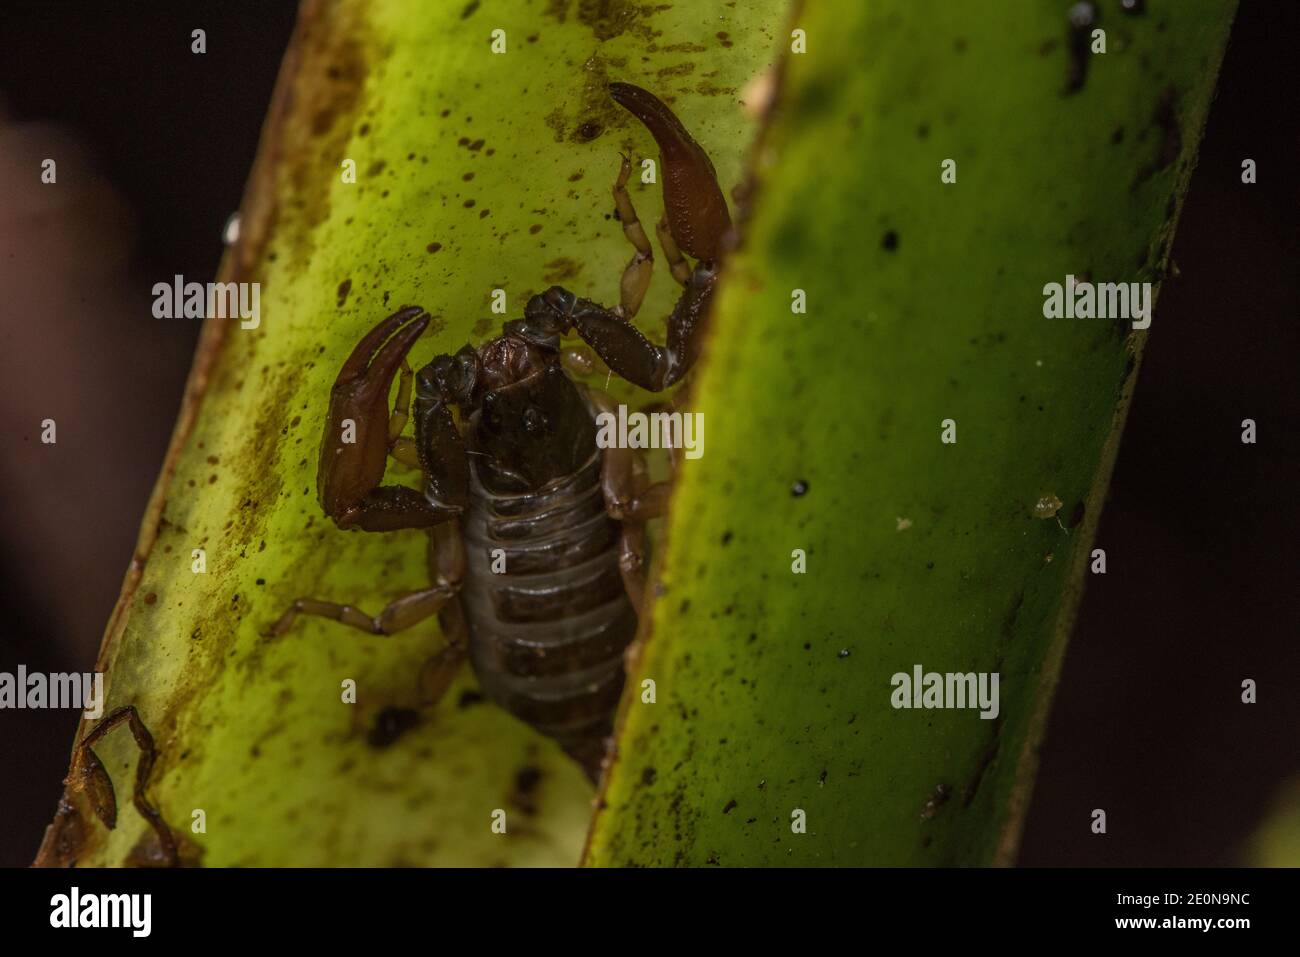 A small tropical scorpion that was living in a bromeliad in the Ecuadorian rainforest. Stock Photo